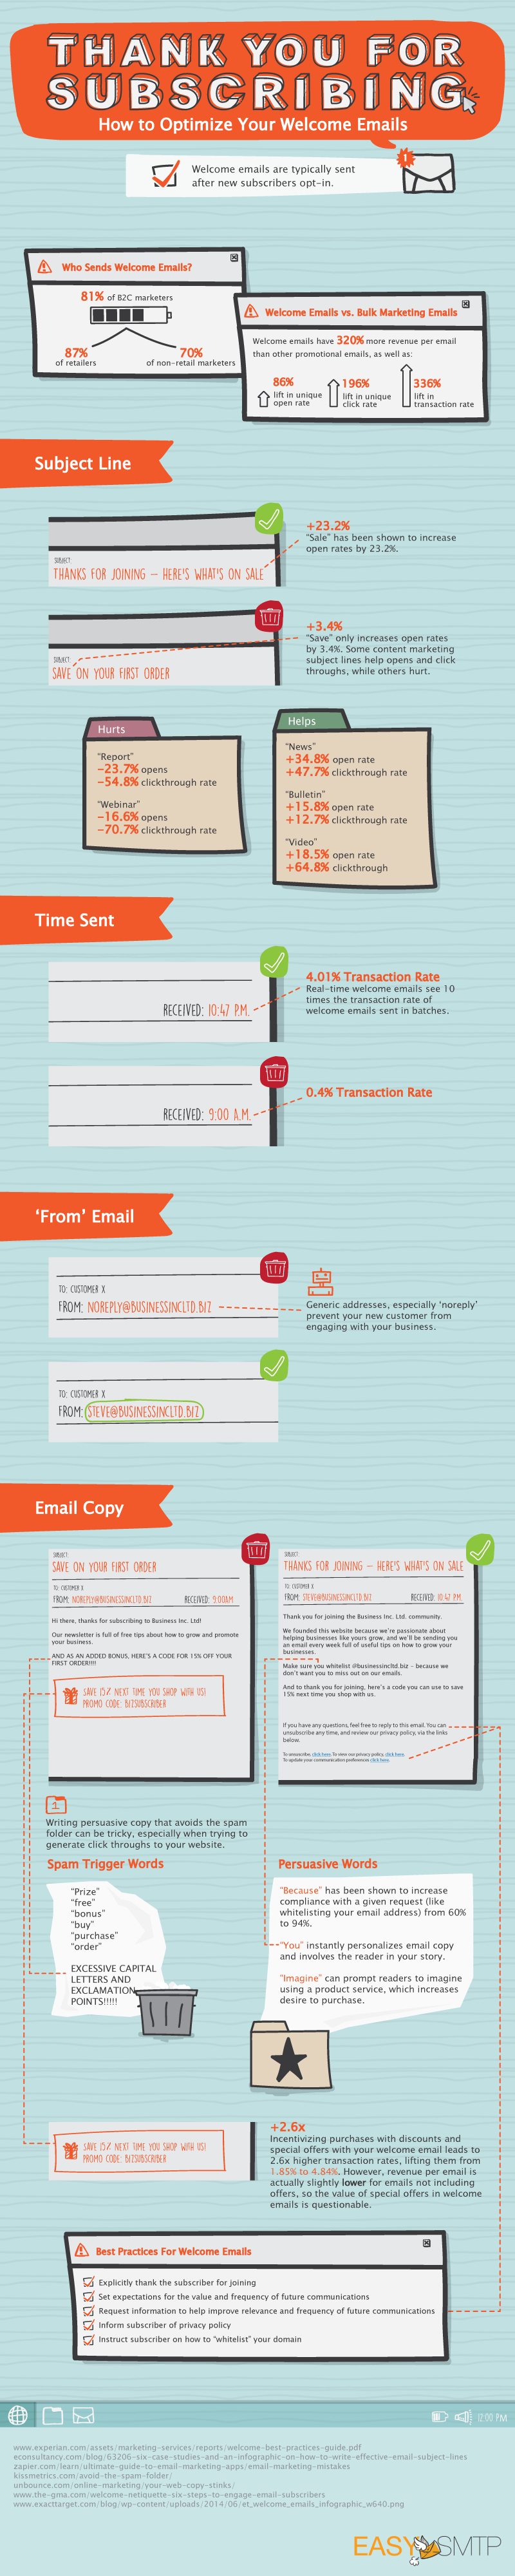 How to Engage Your Email Subscribers From the Moment They Sign Up (Infographic)